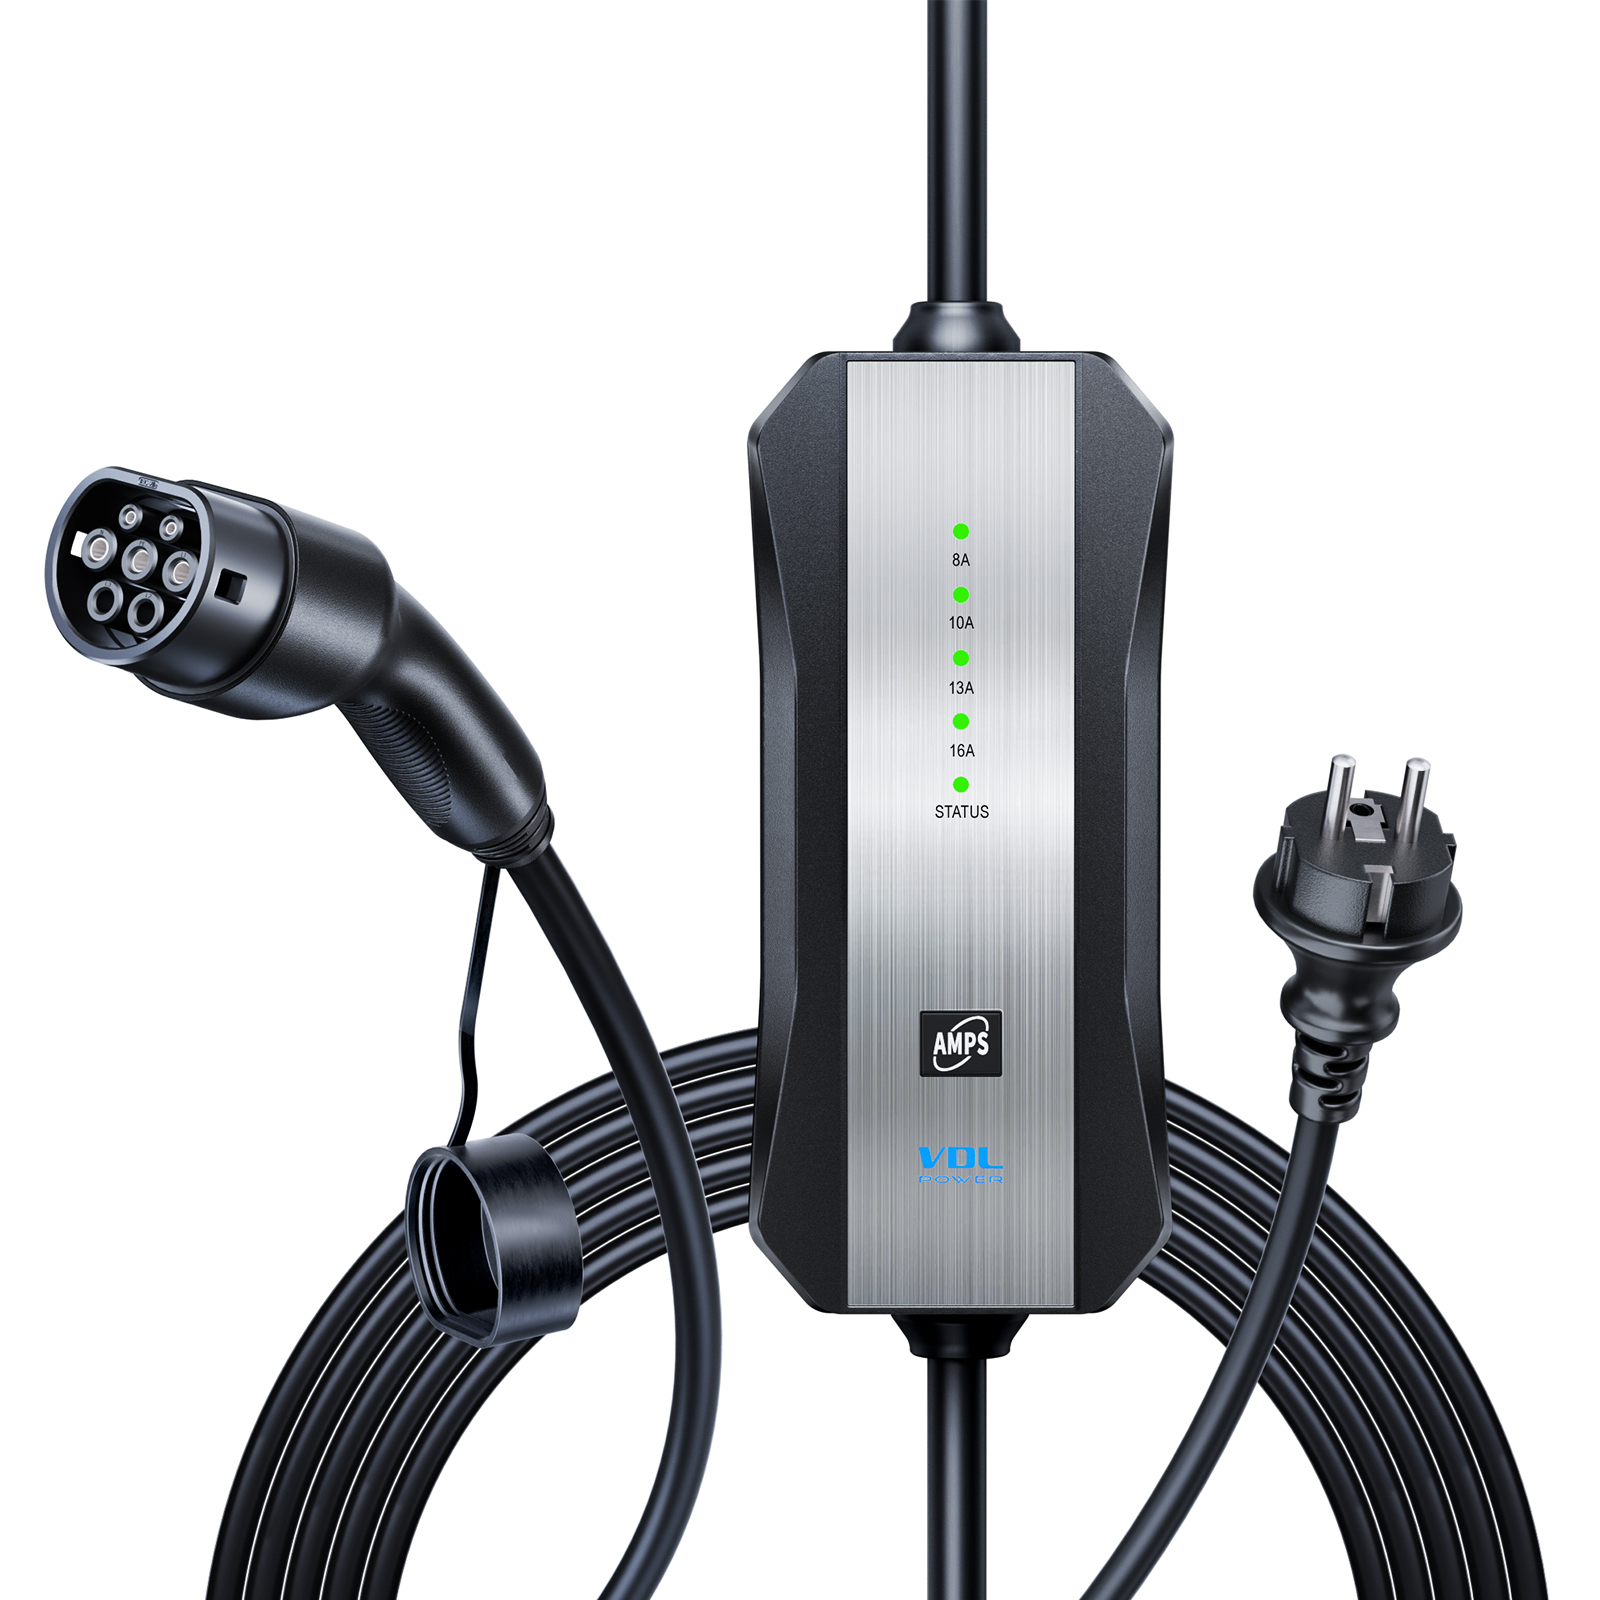 VDL POWER Portable EV Charger , Type 2 EV Charger, Charging Cable